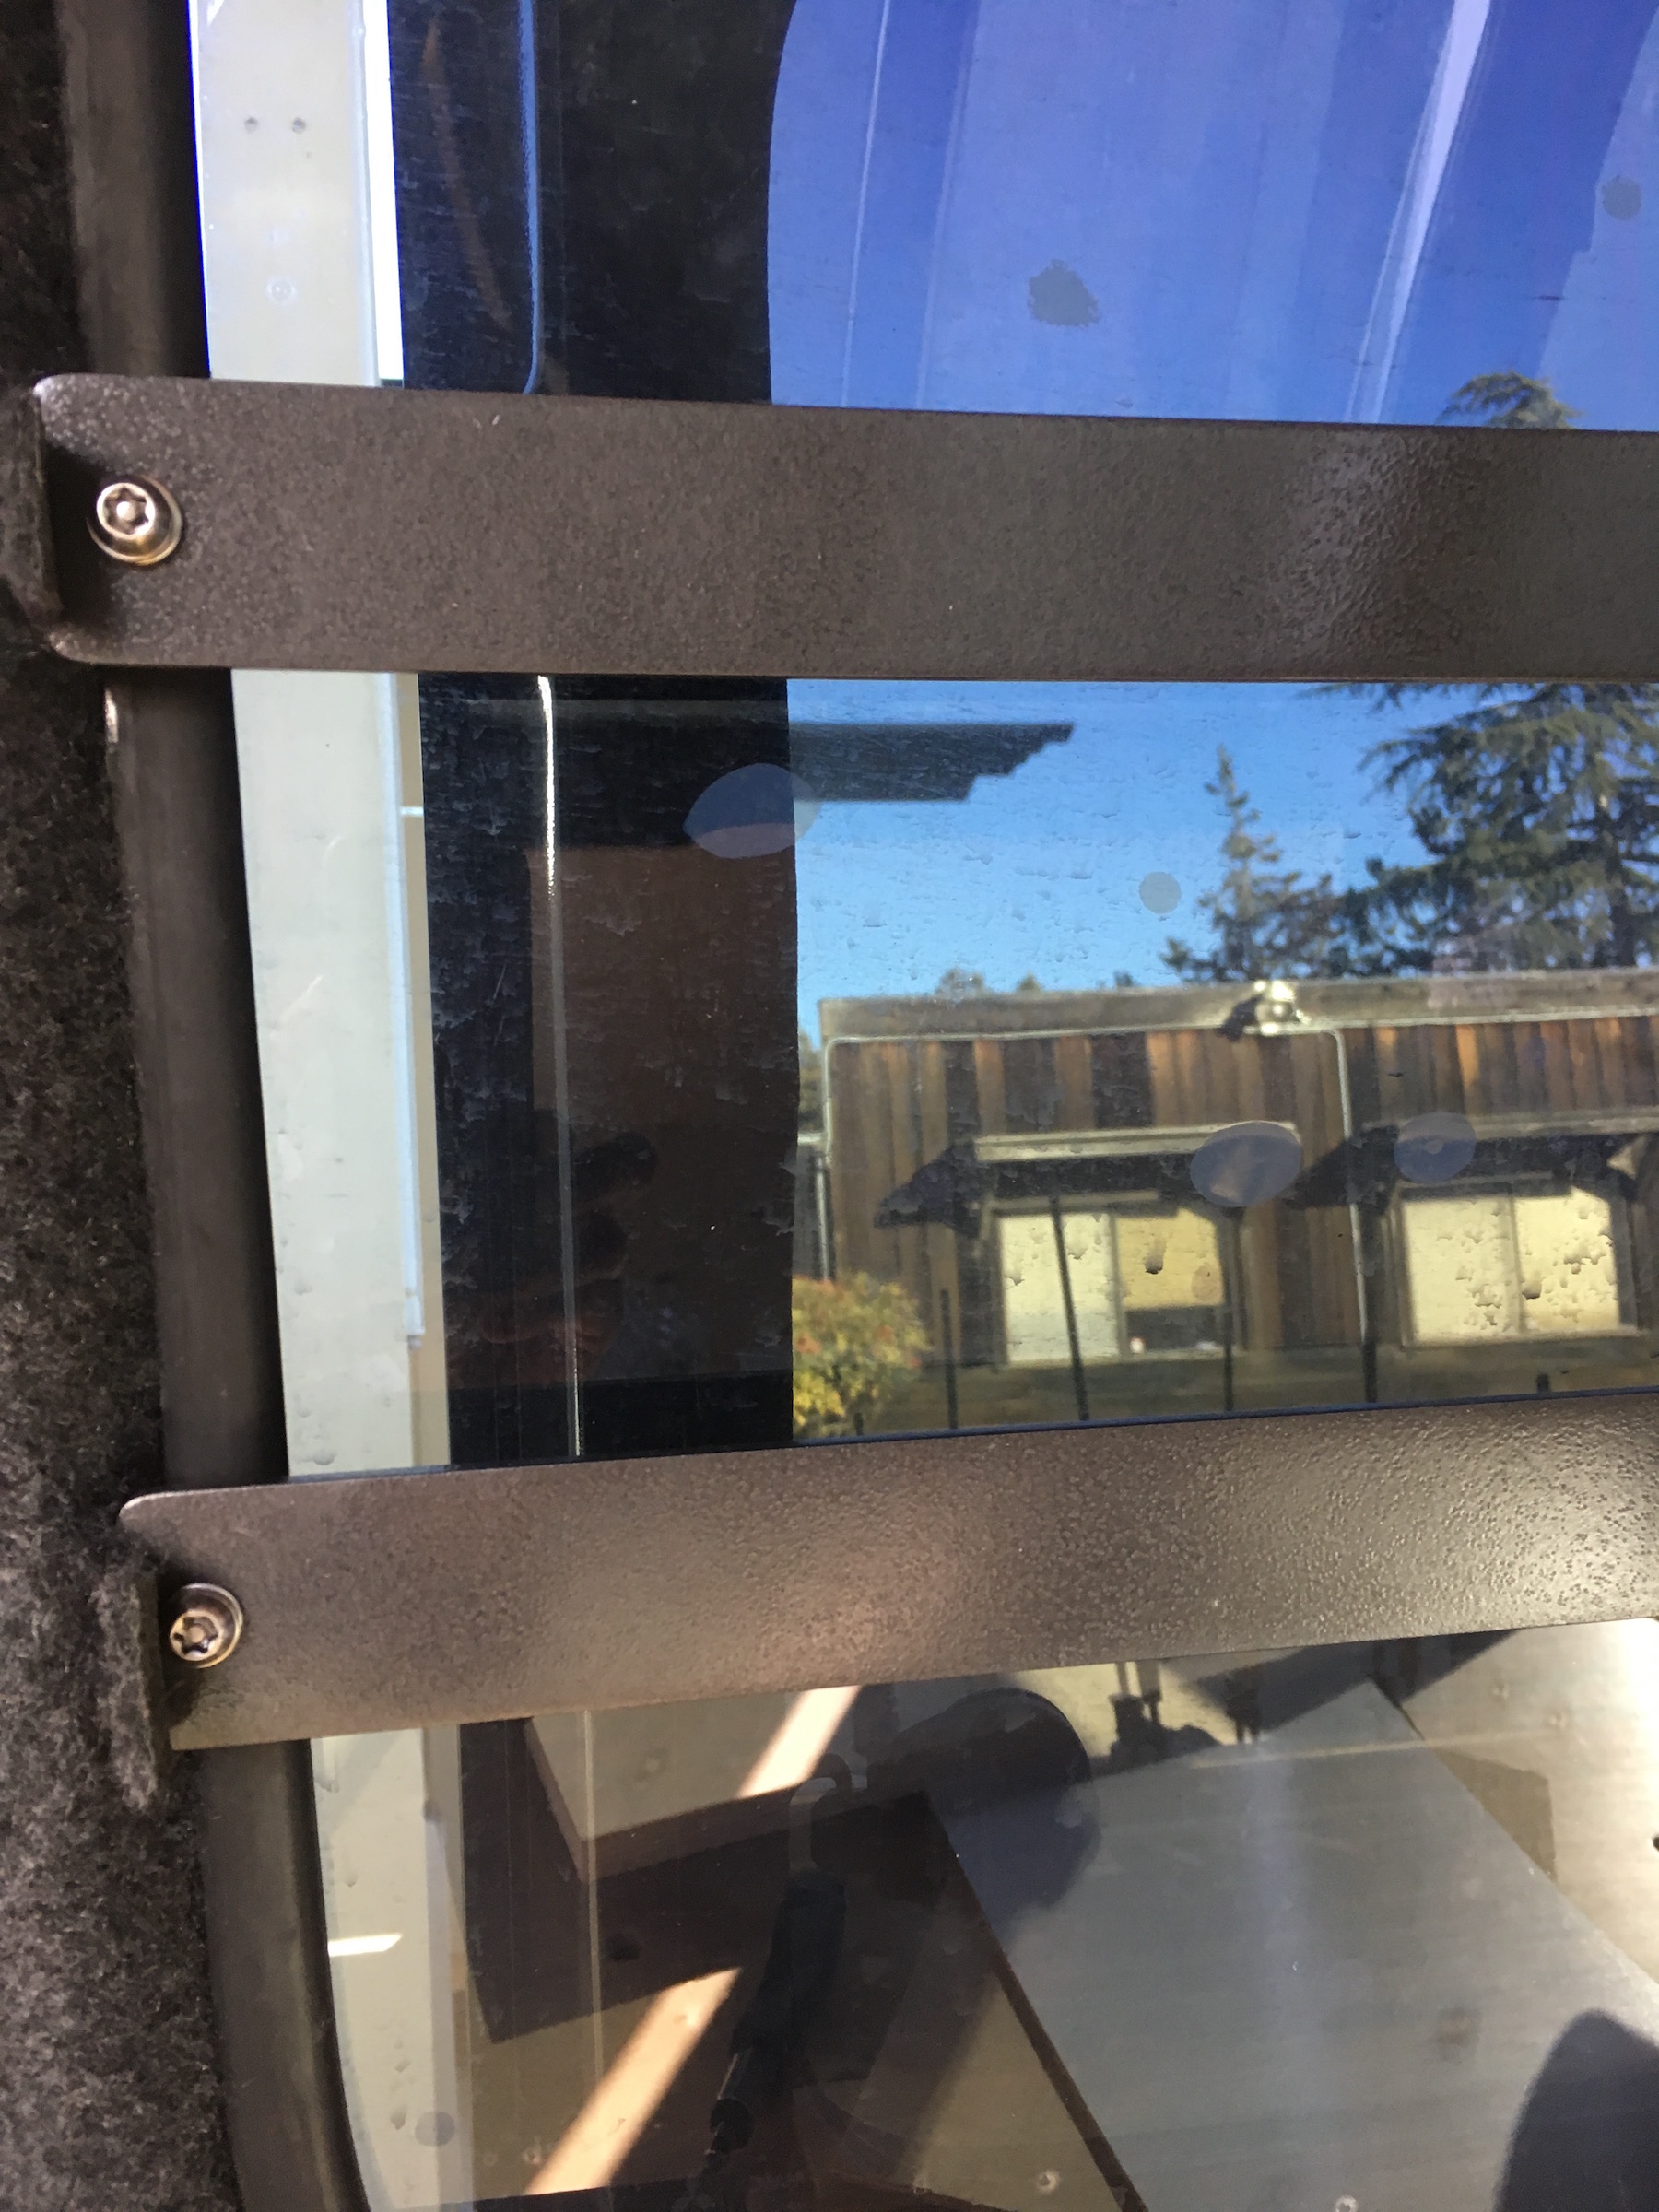 Custom made brackets and security bars for Delica L300 windows.